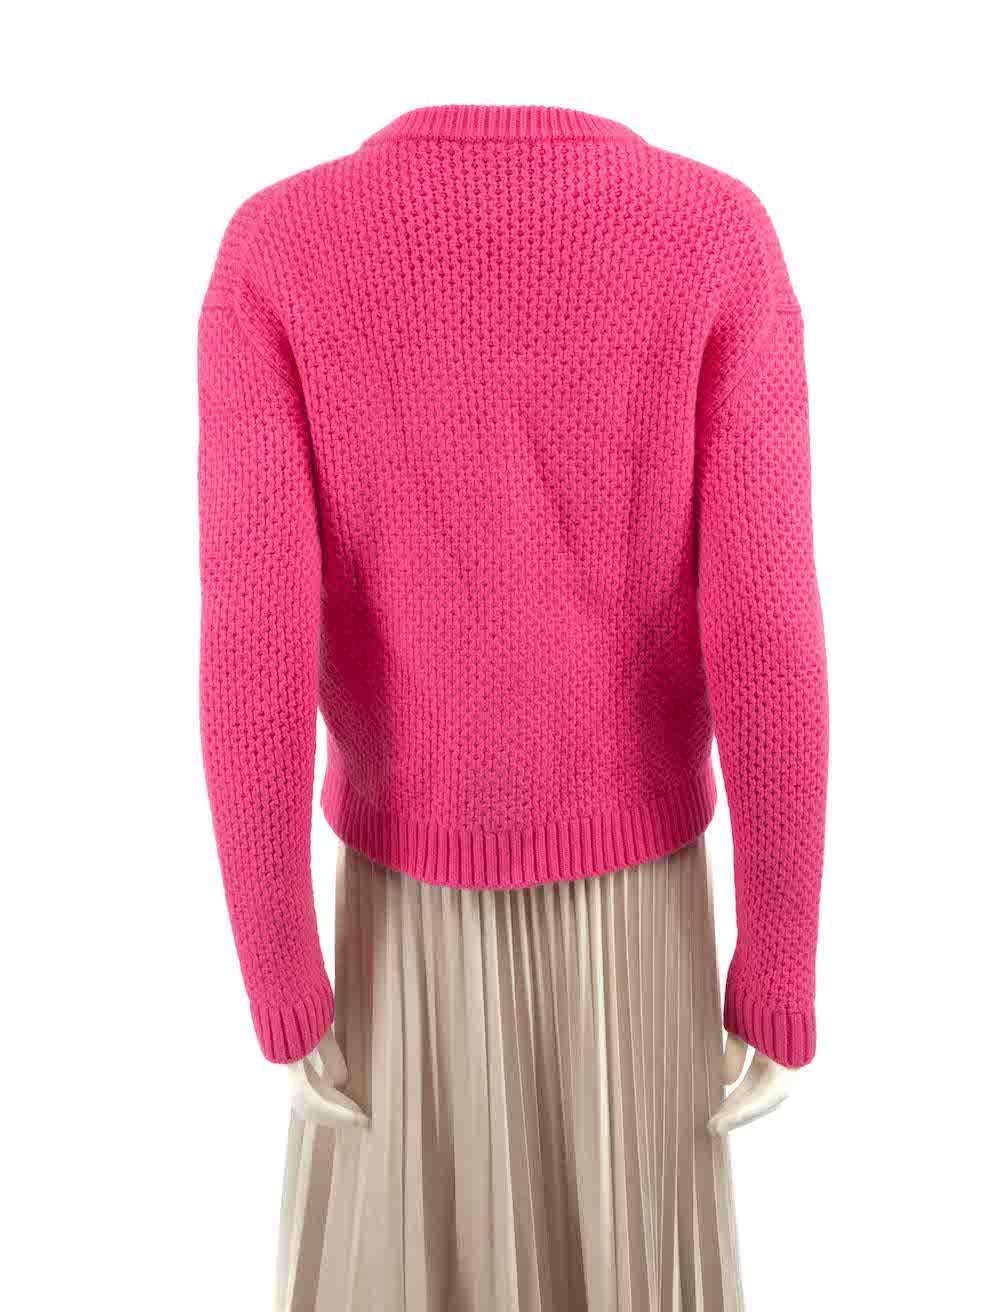 Prada 2019 Pink Wool Knit Long Sleeve Jumper Size XXS In Good Condition For Sale In London, GB